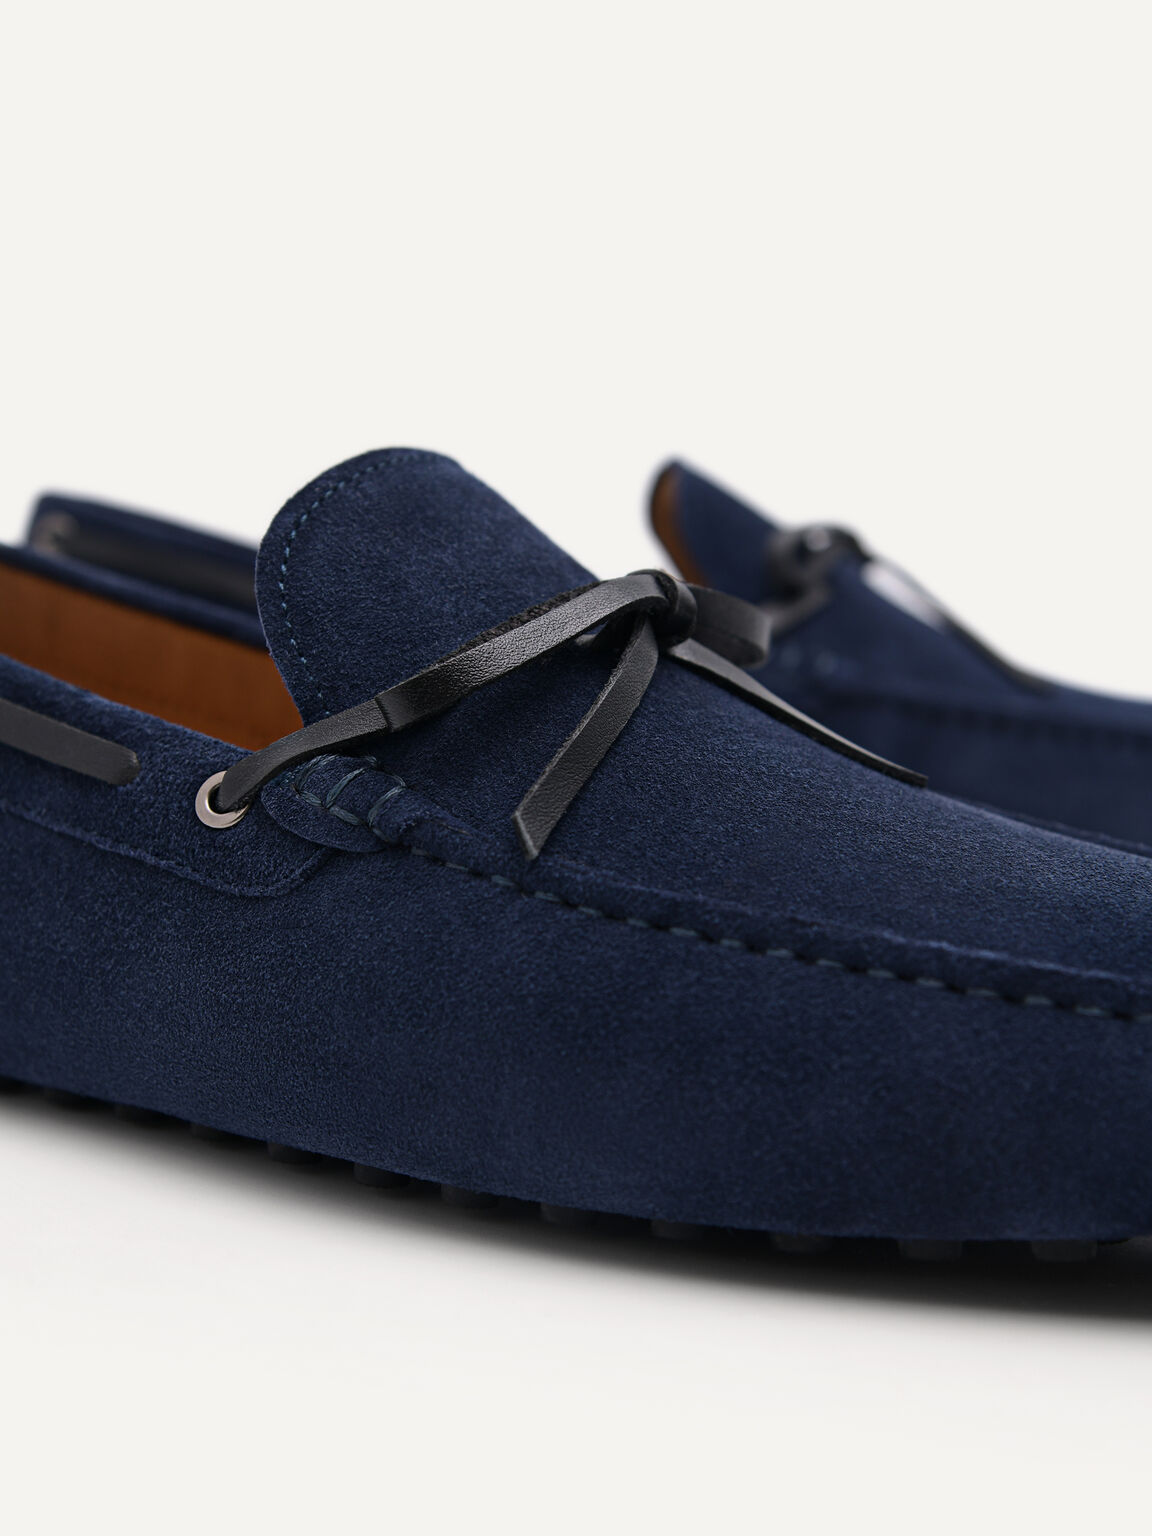 Suede Moccasins with Bow Detail, Navy